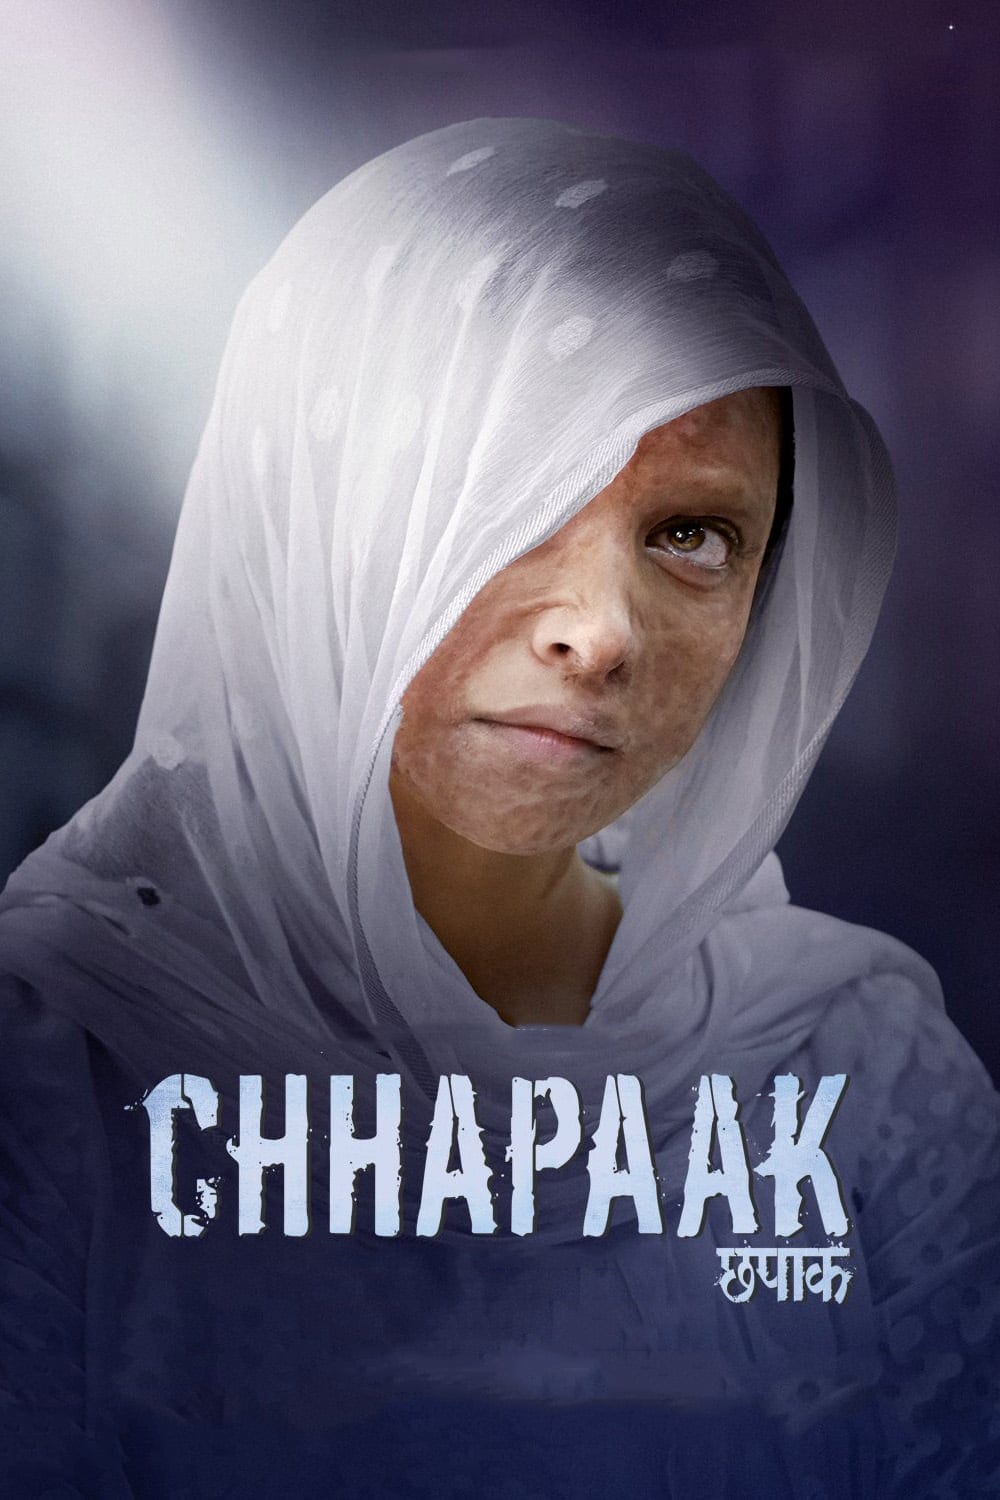 Poster for the movie "Chhapaak"